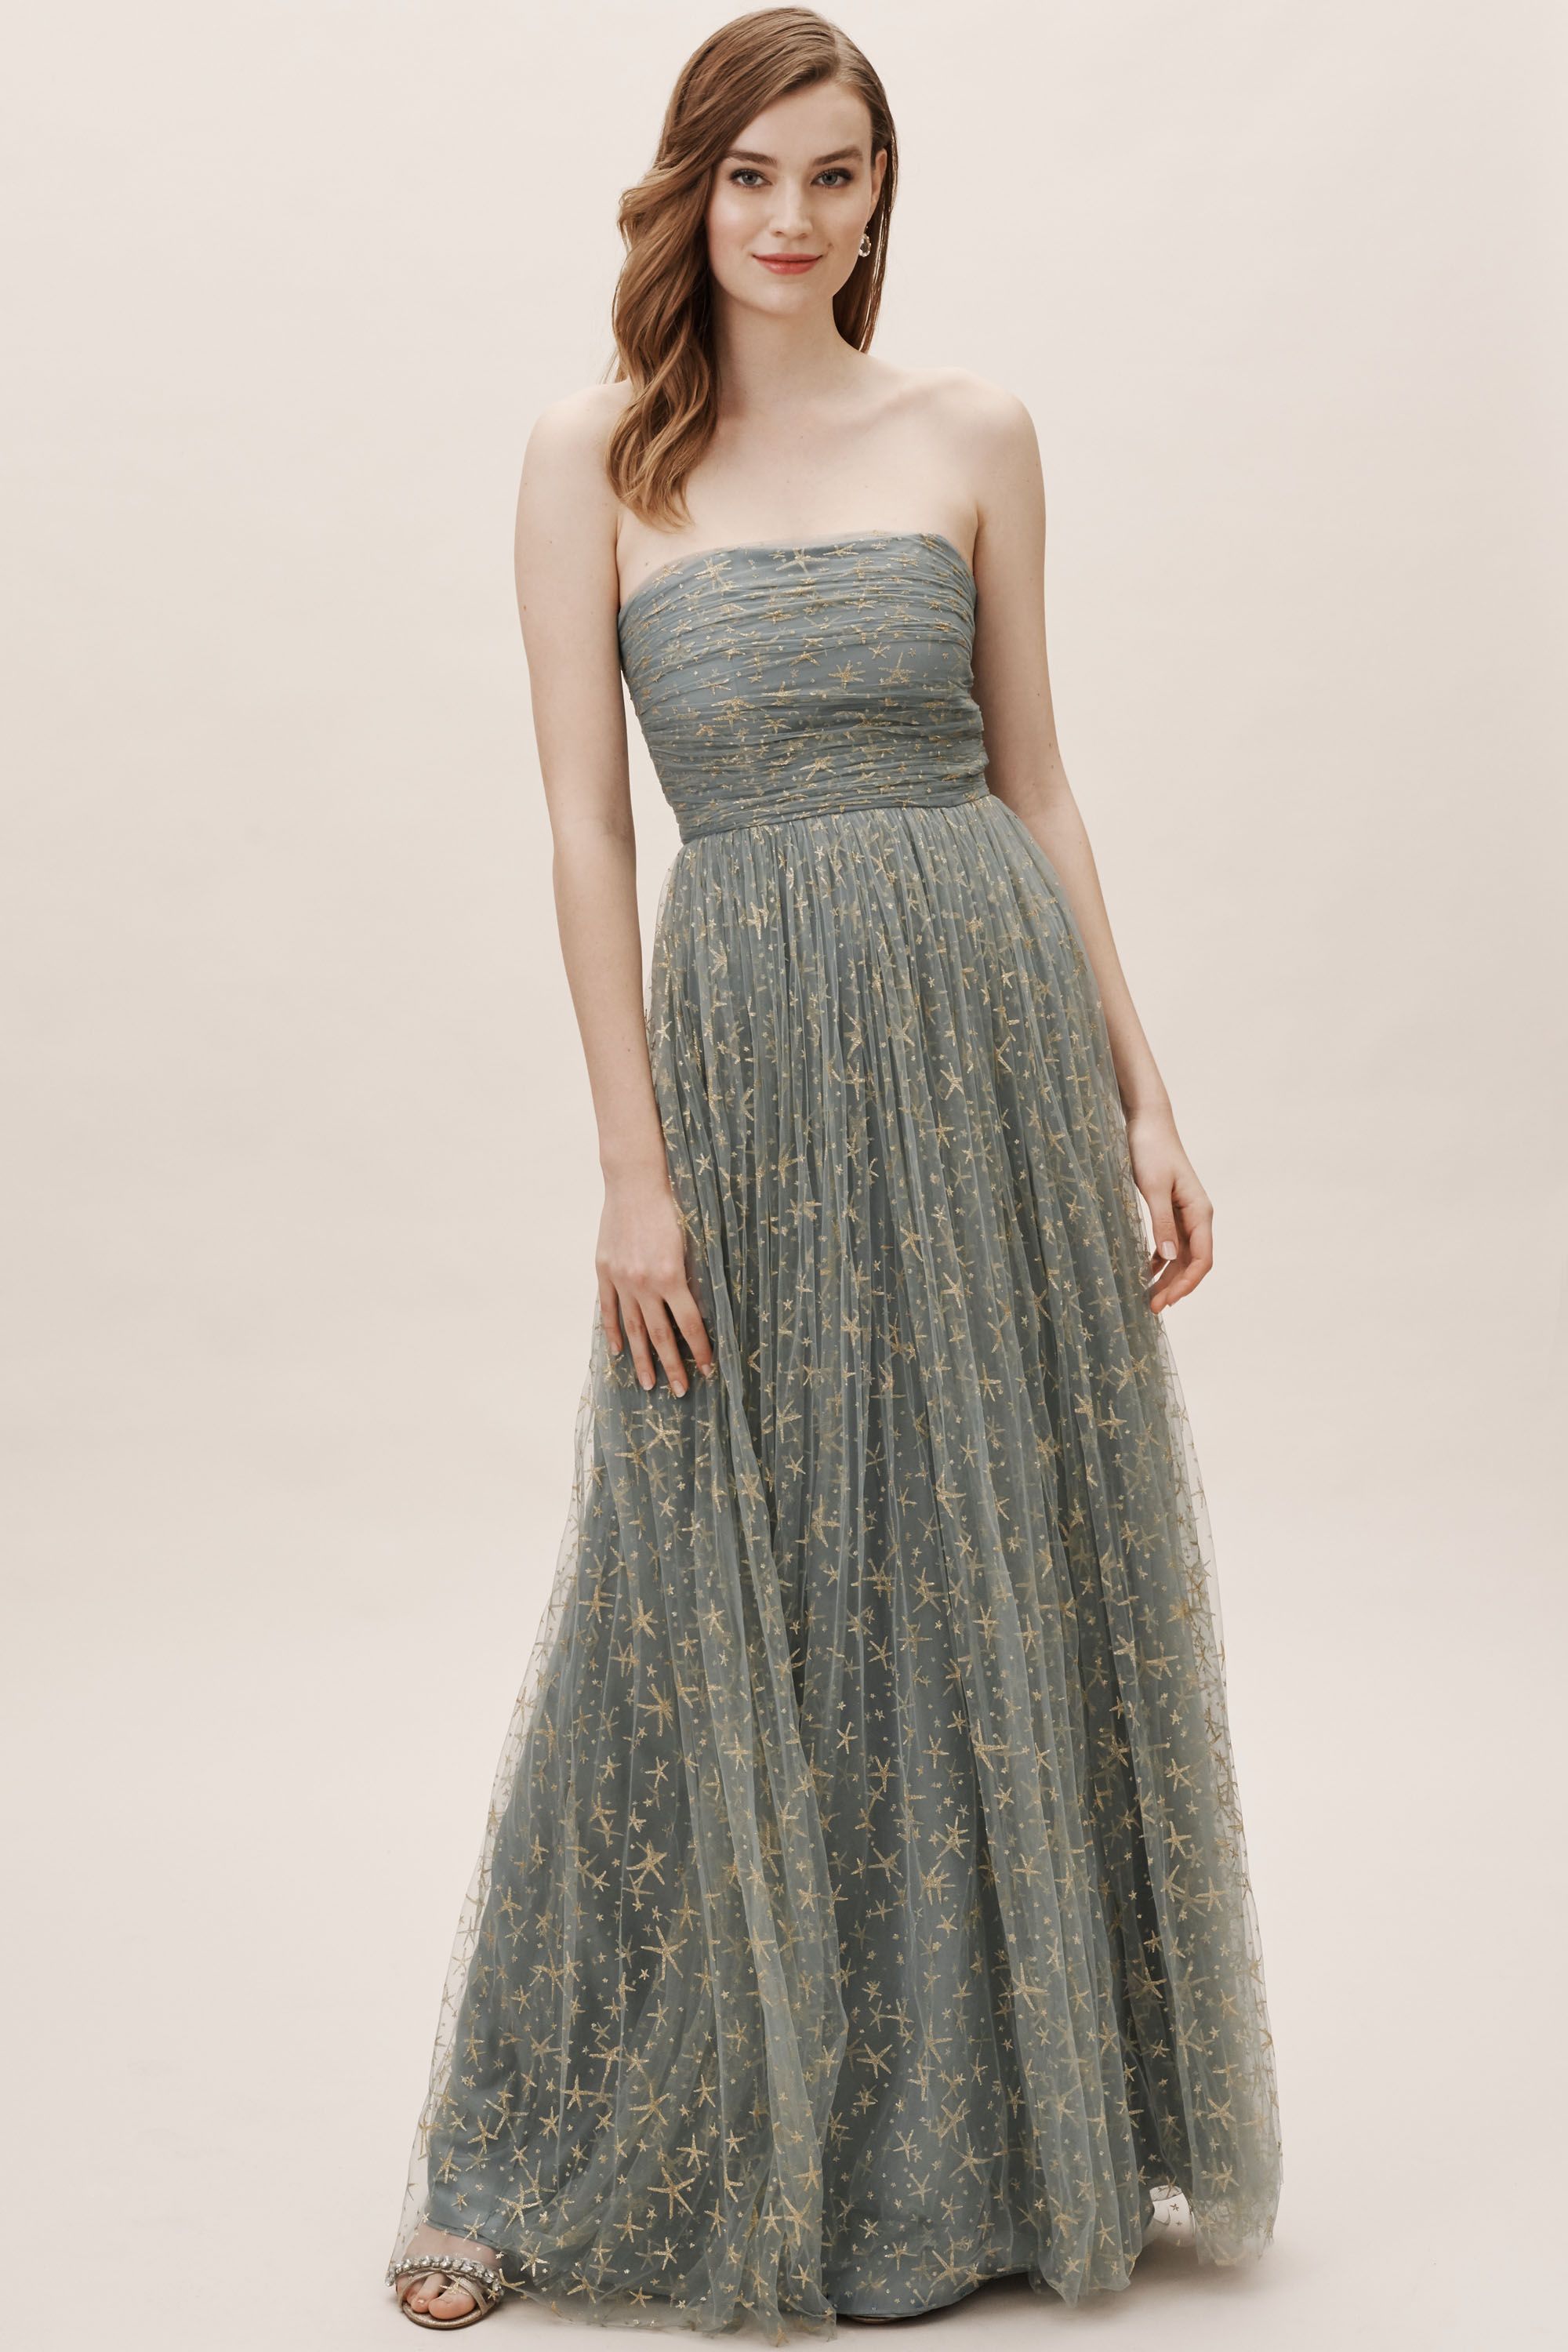  Formal  Dresses  Special Occasion Dresses  BHLDN